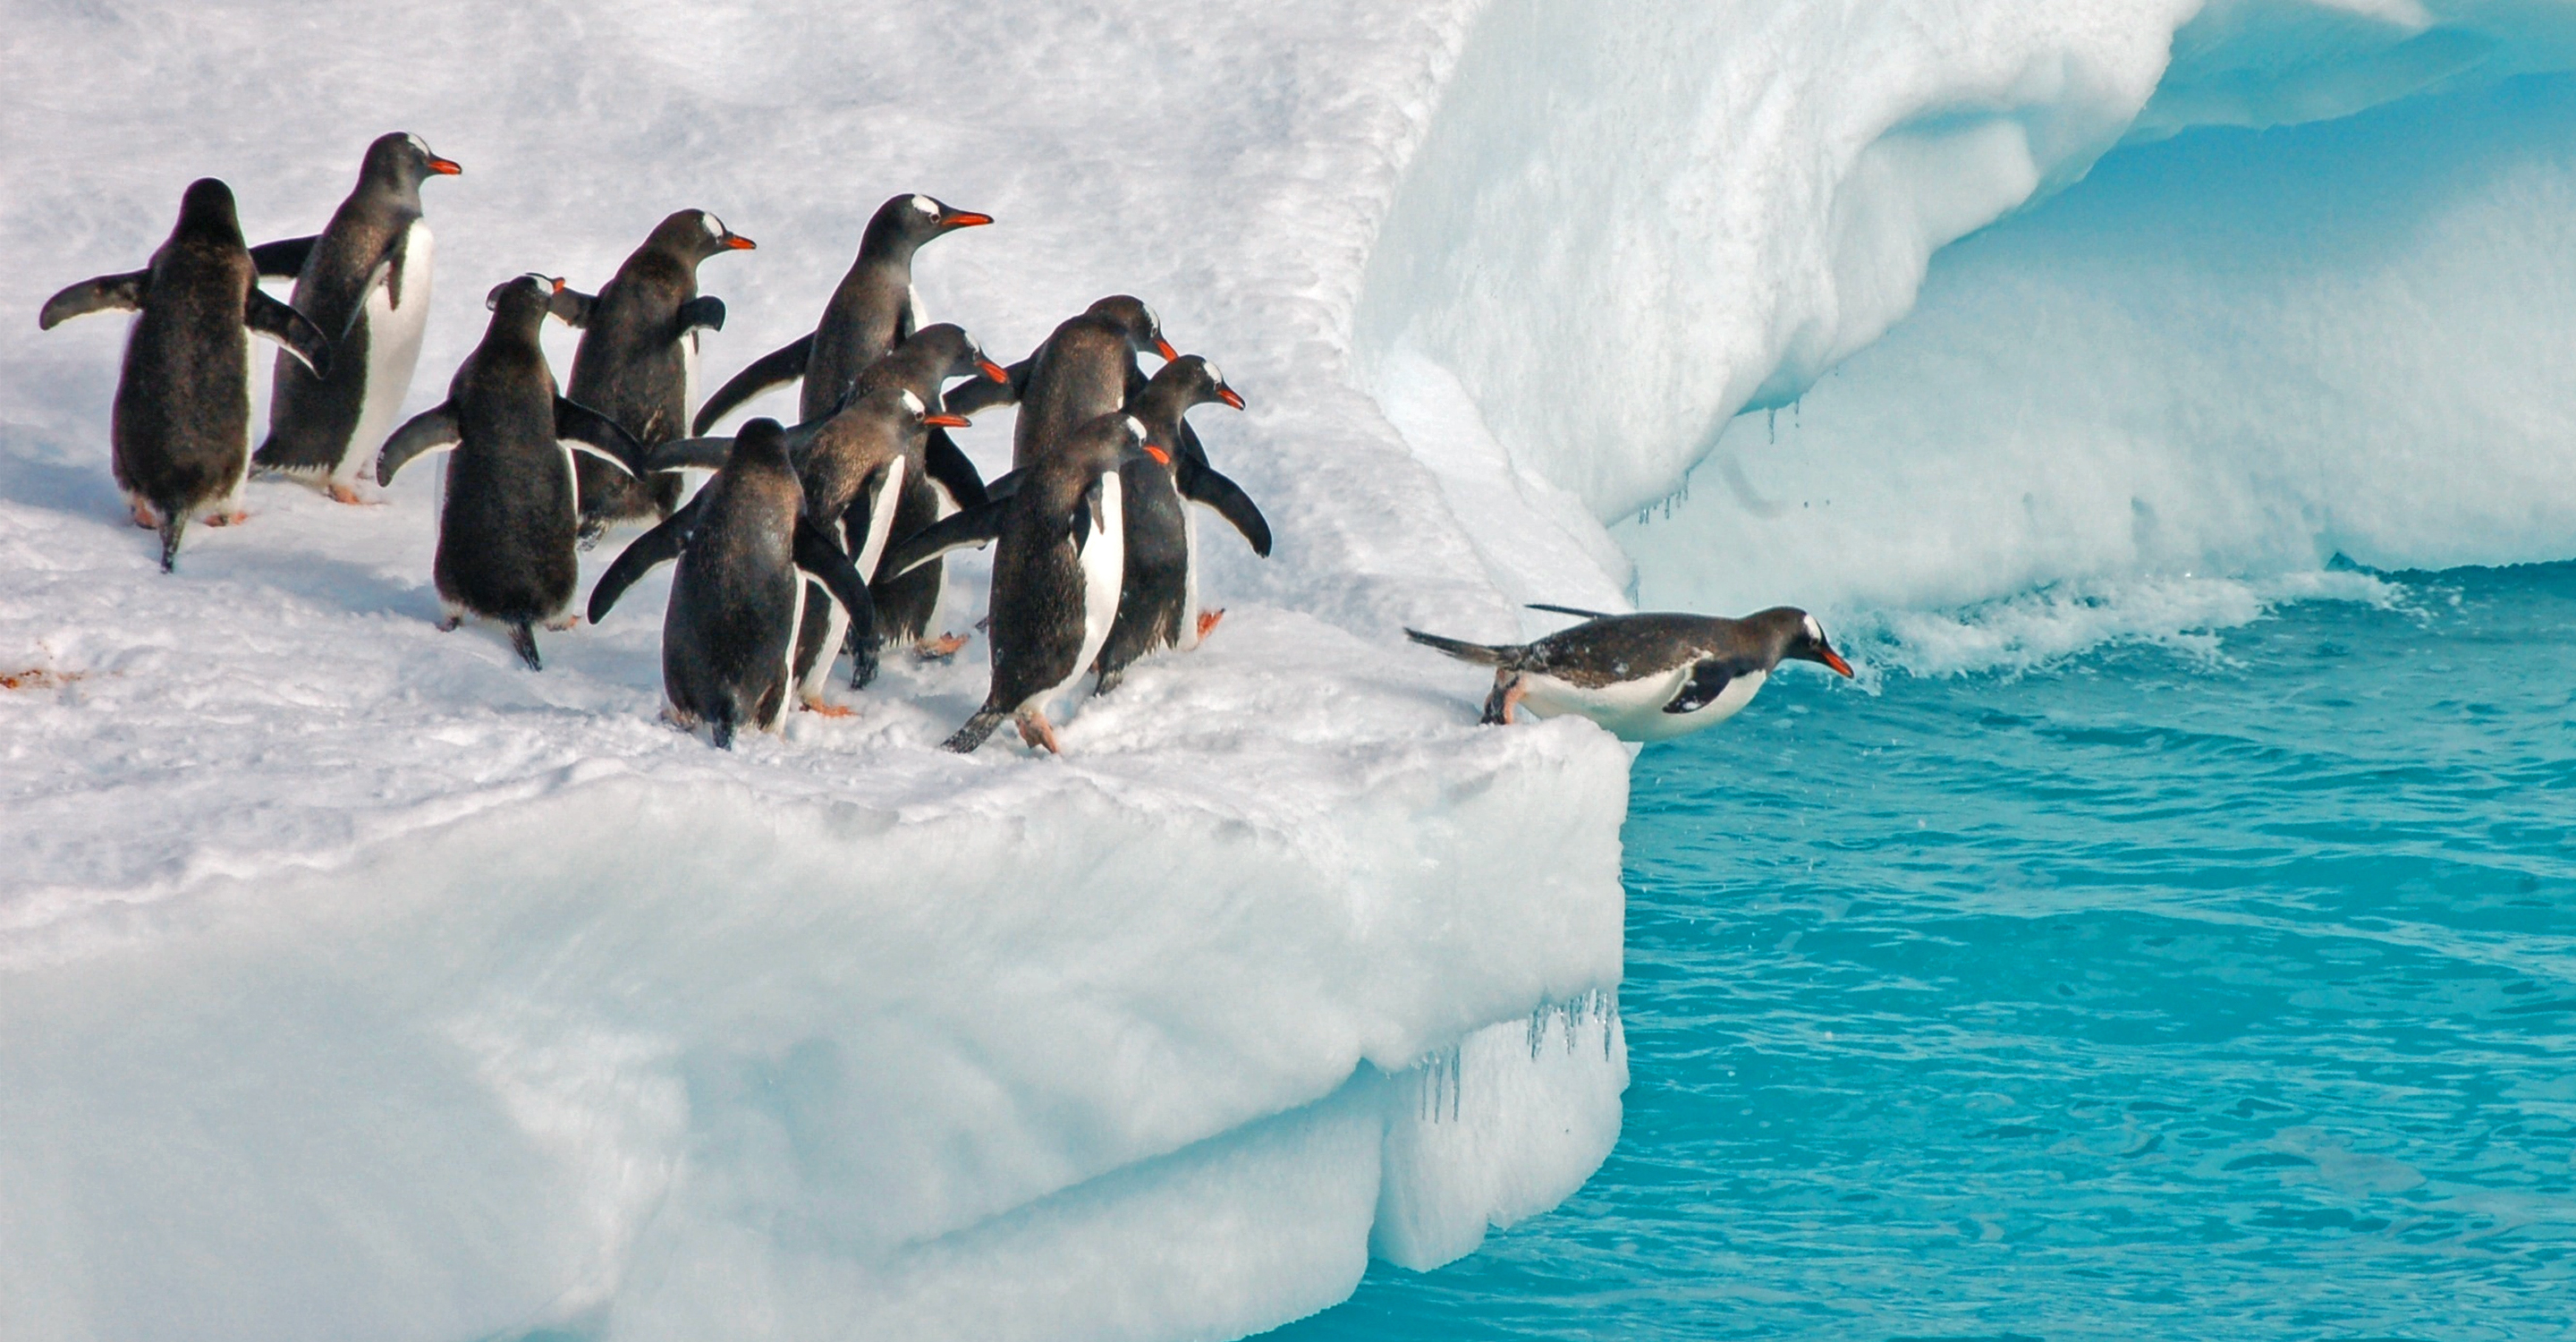 Gentoo penguins jump into the water from an iceberg